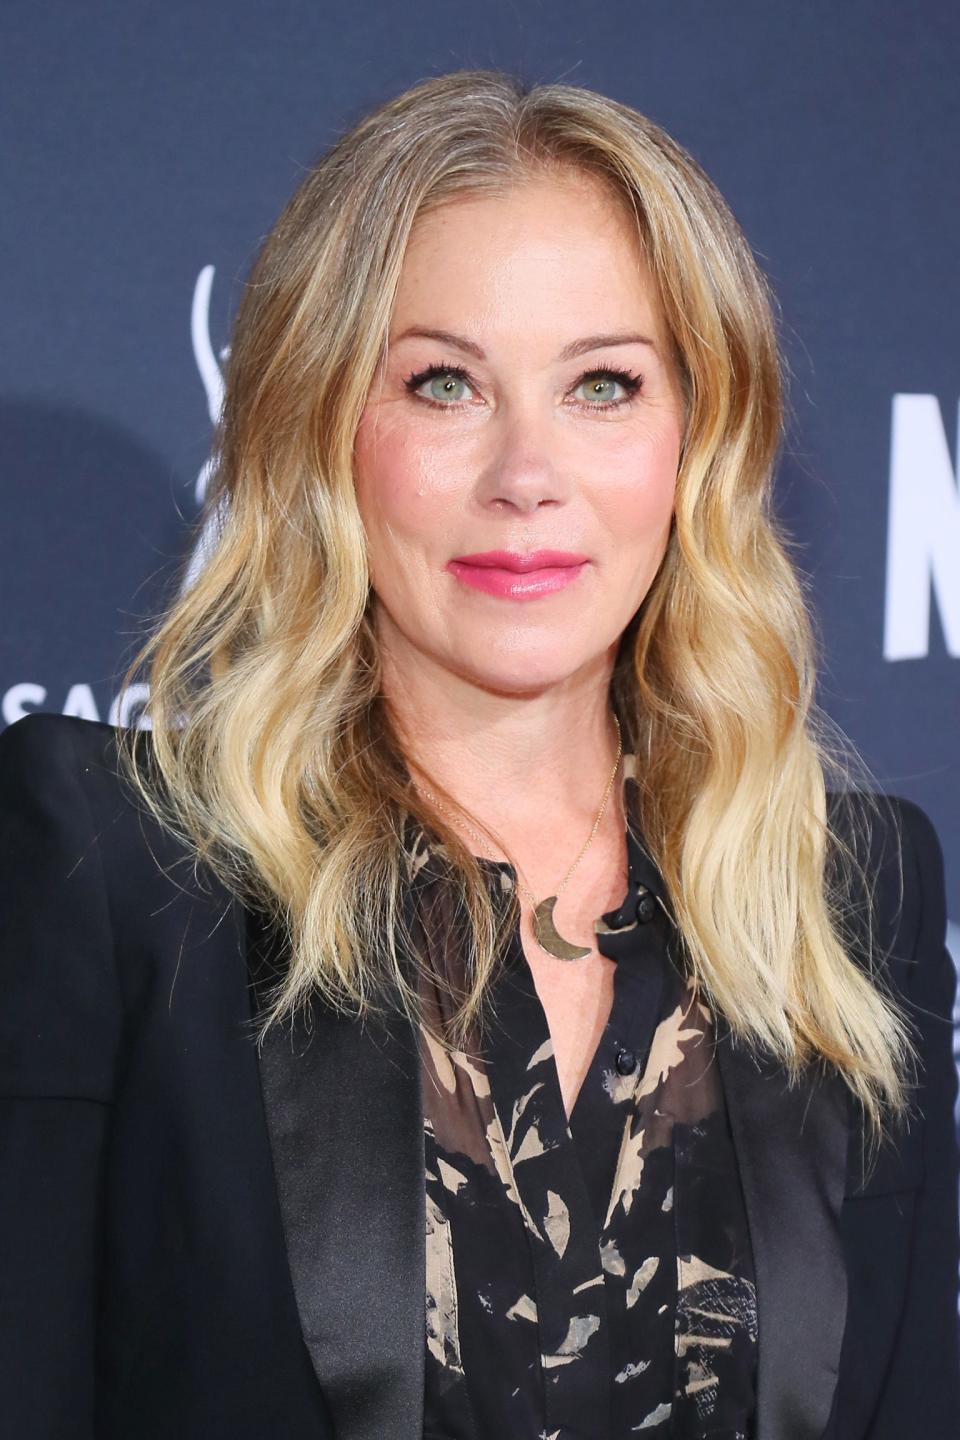 Christina Applegate will be honored with a star on the Hollywood Walk of Fame on Nov. 14.